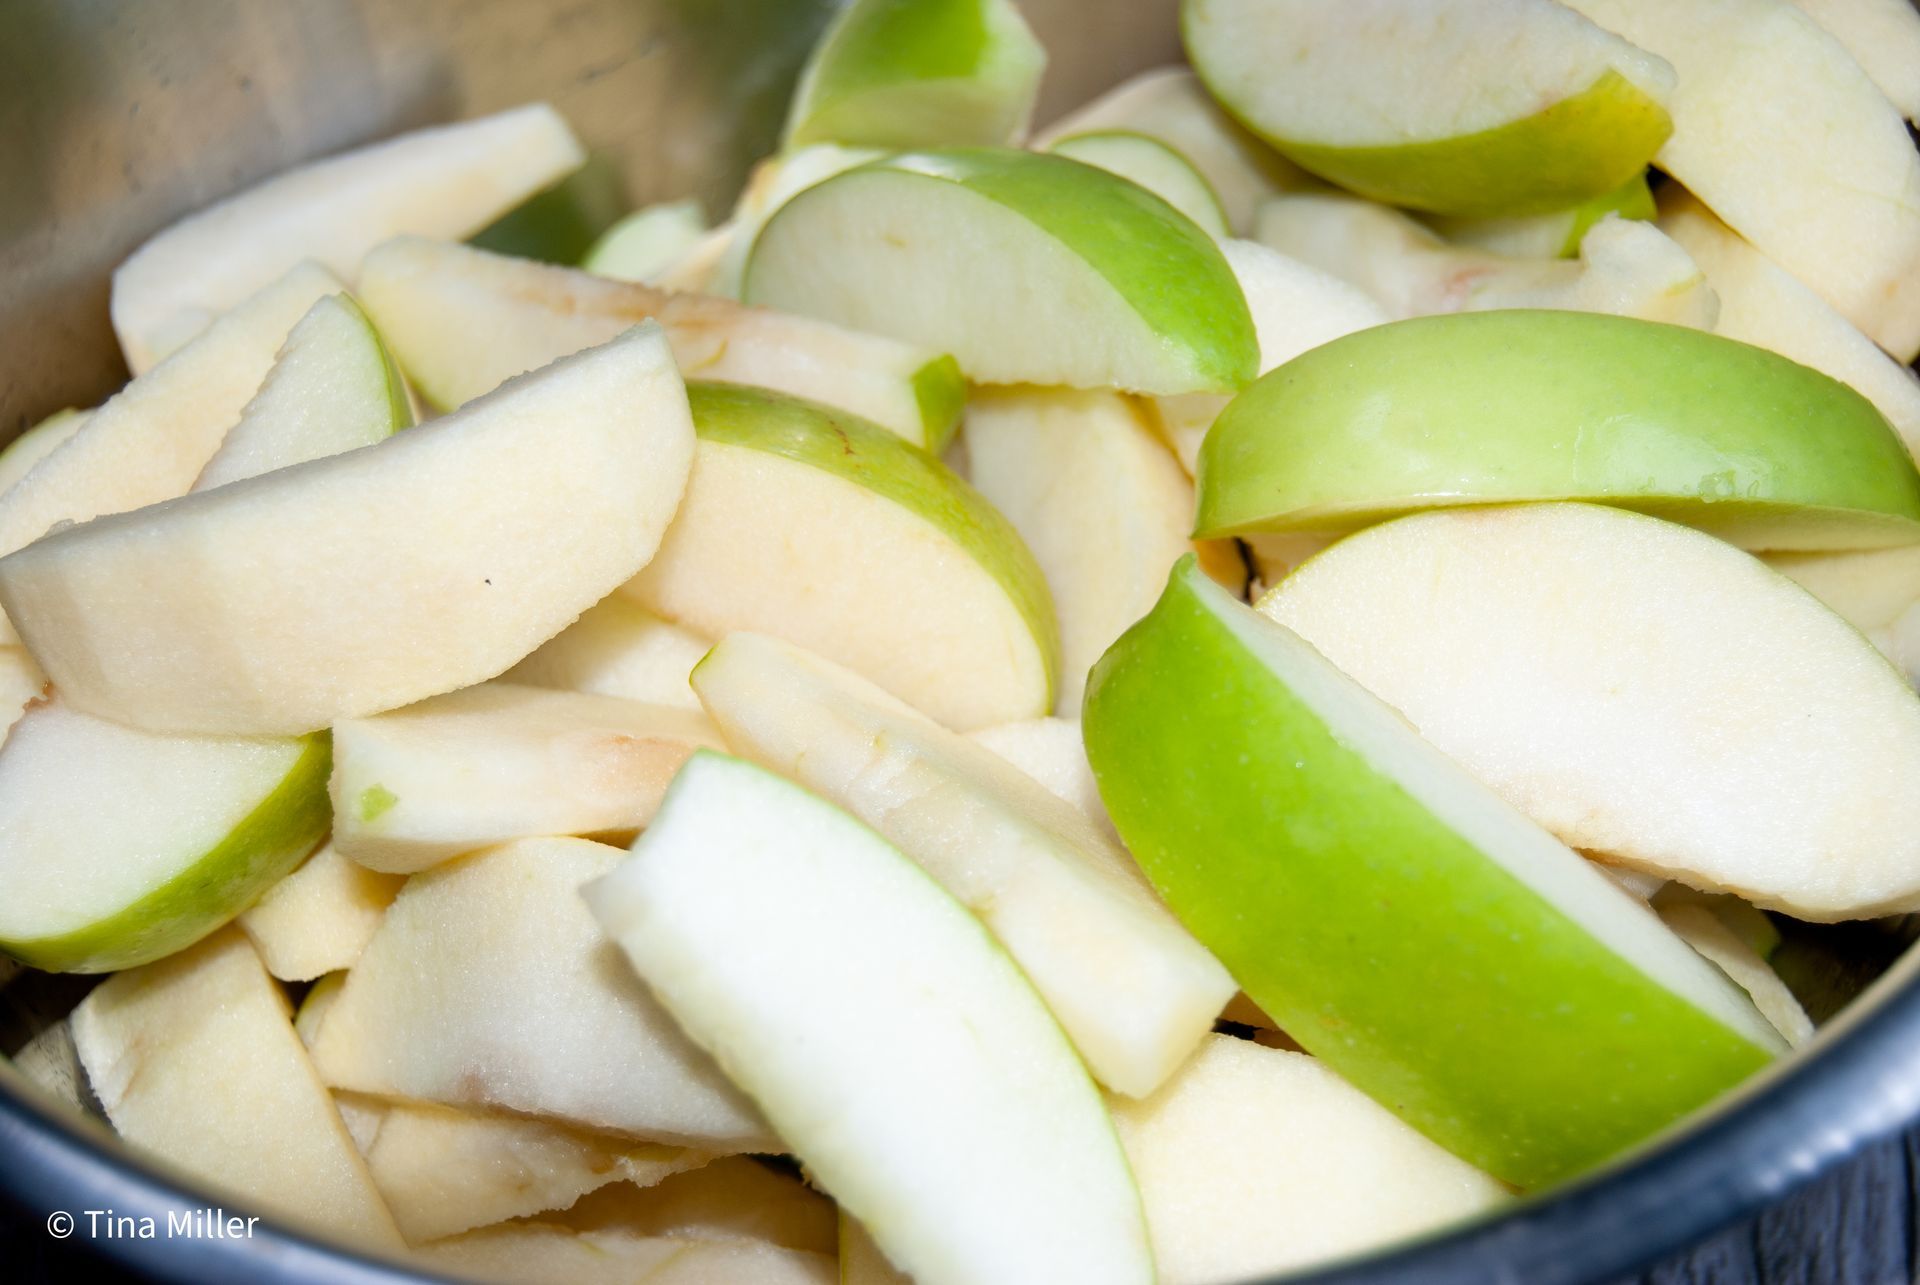 Granny Smith apples slices with skins left on some, piled high inside a crockpot.